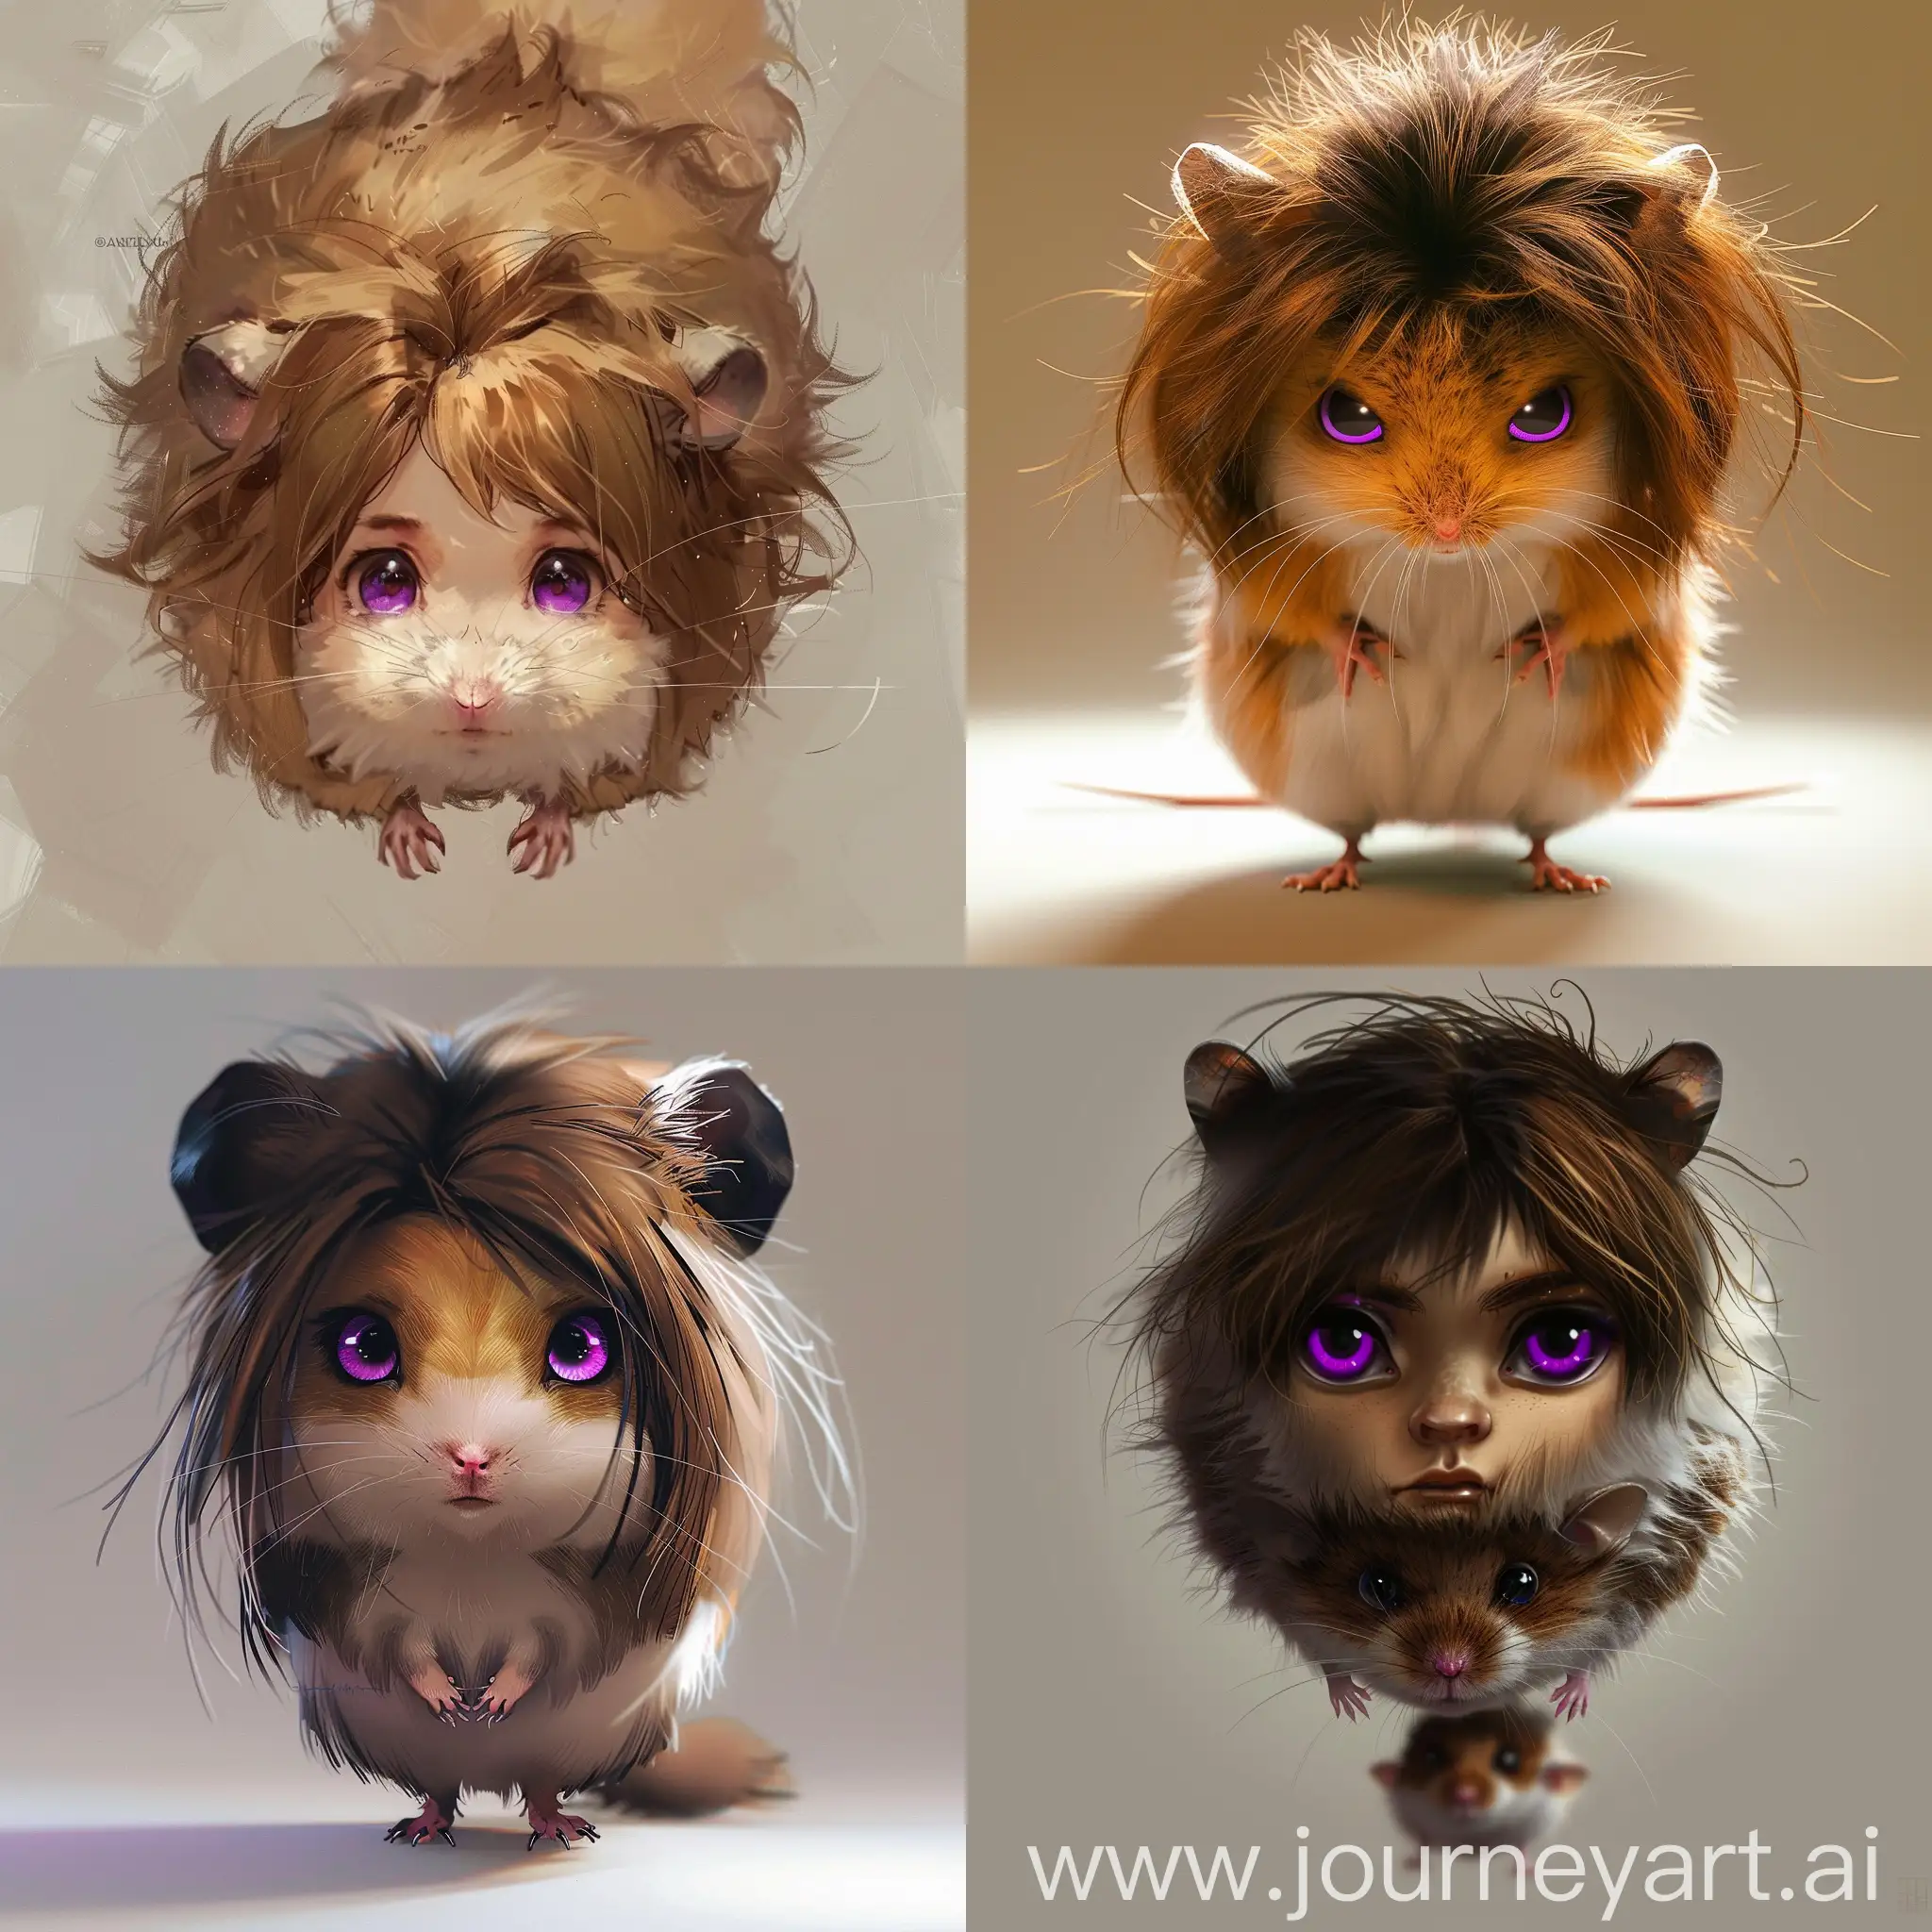 Prompt: Generate an AI image of a fantastical creature merging the features of a hamster and a human girl. The creature should have the lower body of a hamster, complete with fluffy tail, while the upper body should resemble that of a human girl, with brown hair and piercing purple eyes.